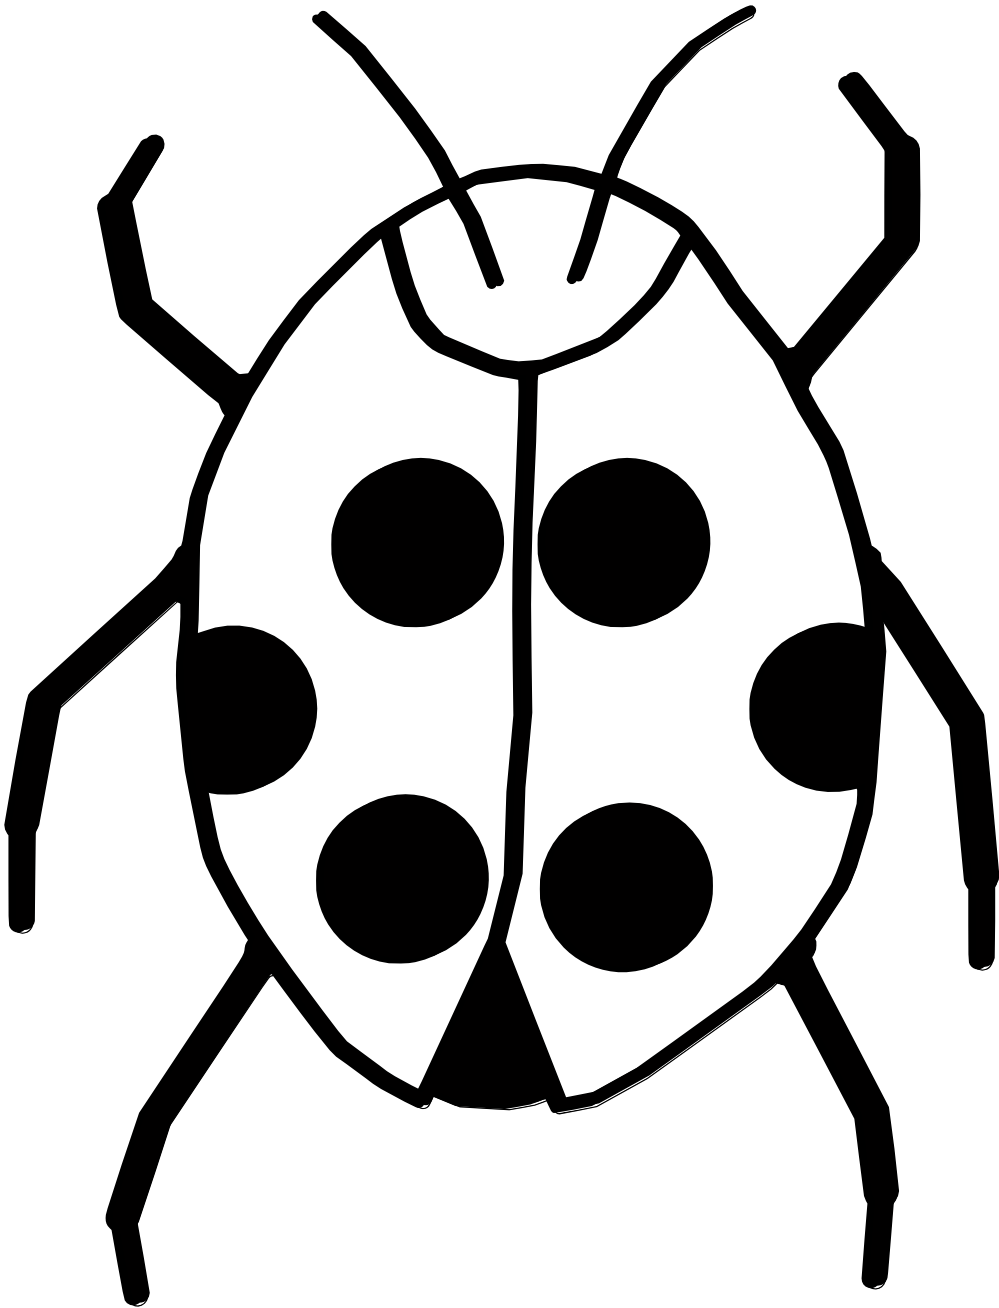 Insects Clipart Black And White - ClipArt Best